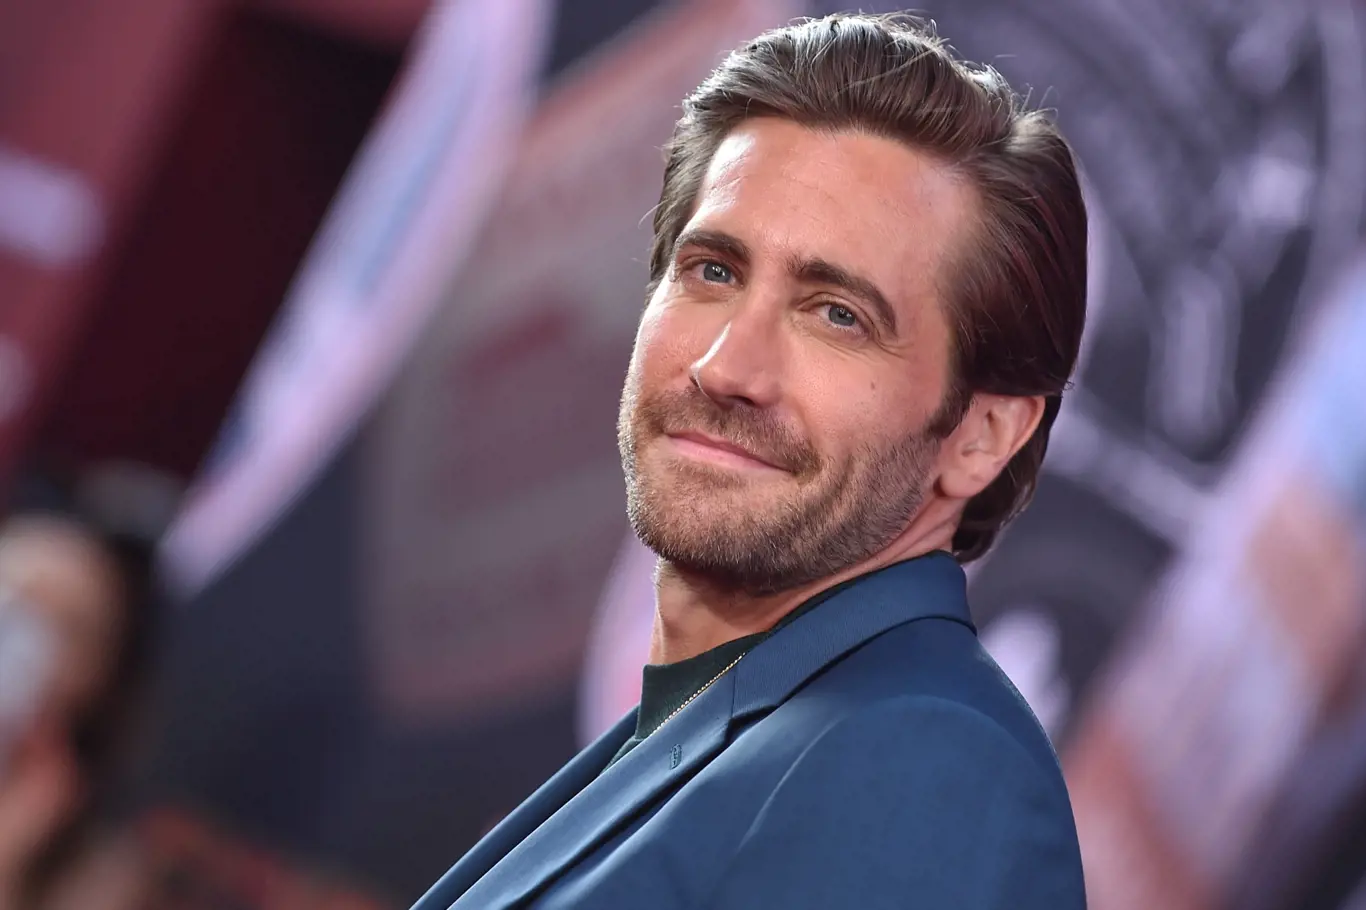 LOS ANGELES - JUN 26:  Jake Gyllenhaal arrives for the 'Spider-Man: Far From Home' World Premiere on June 26, 2019 in Hollywood, CA